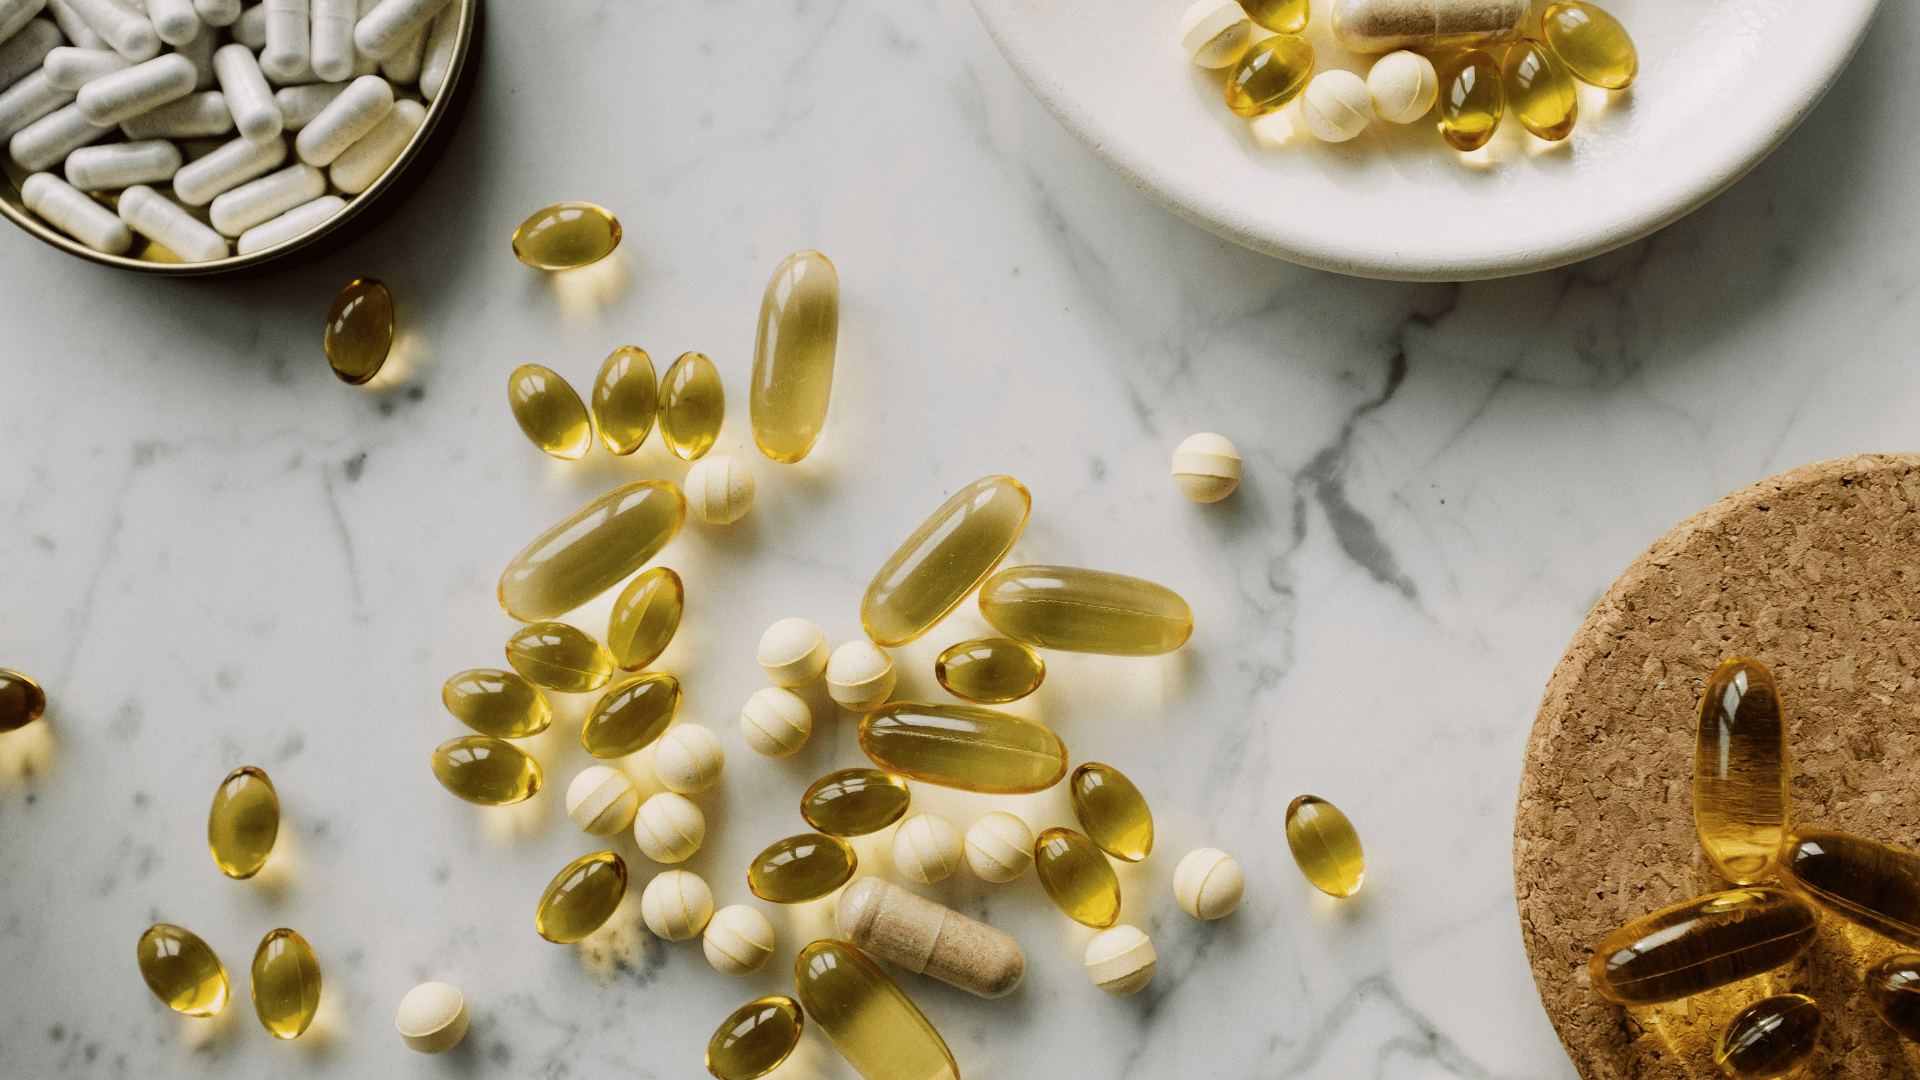 My Favorite Supplements for Gut Health